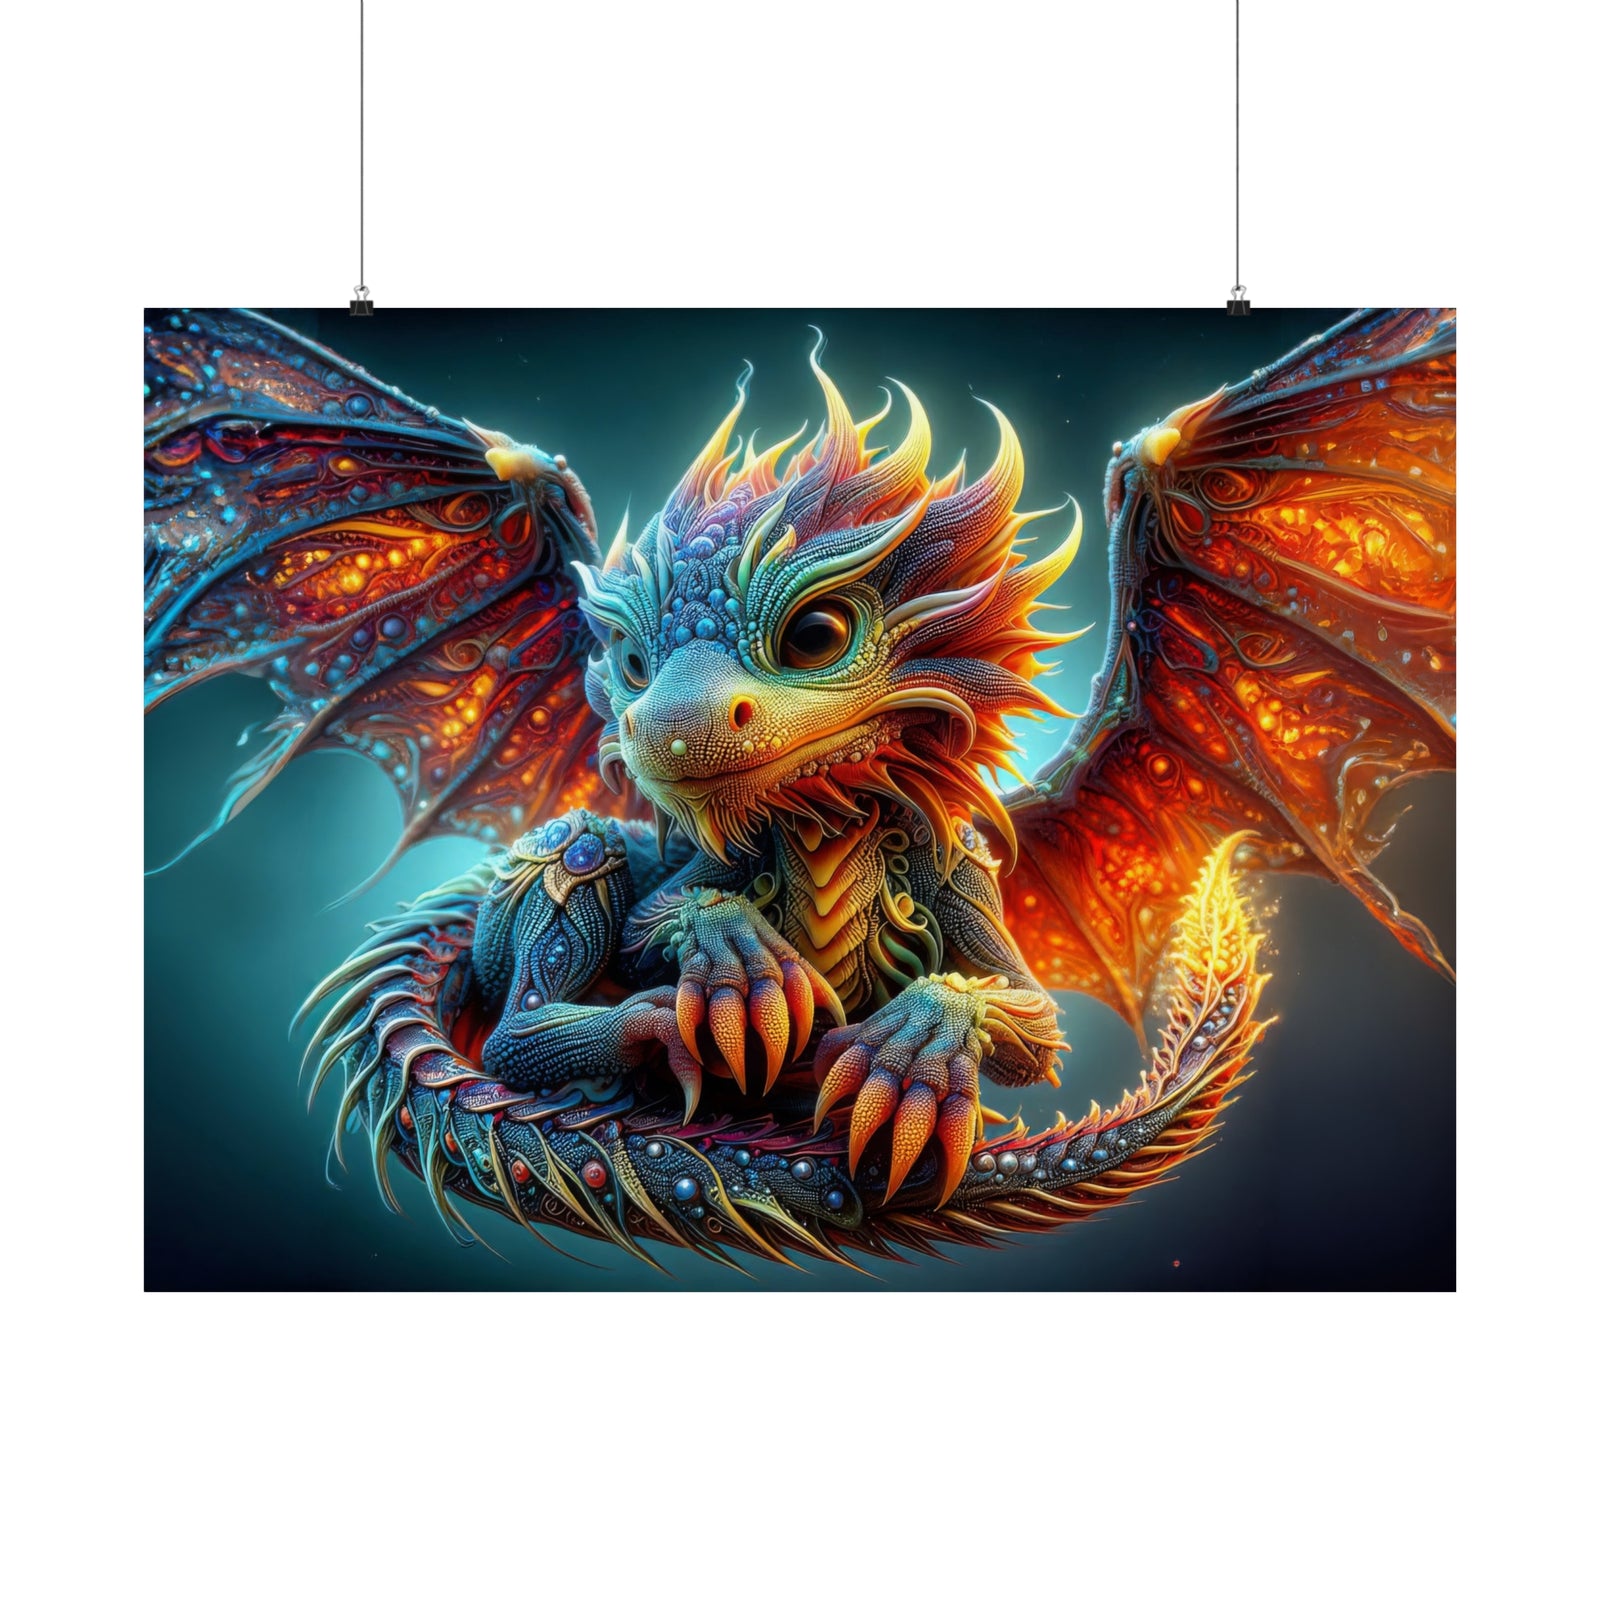 The Gilded Wyvern Poster